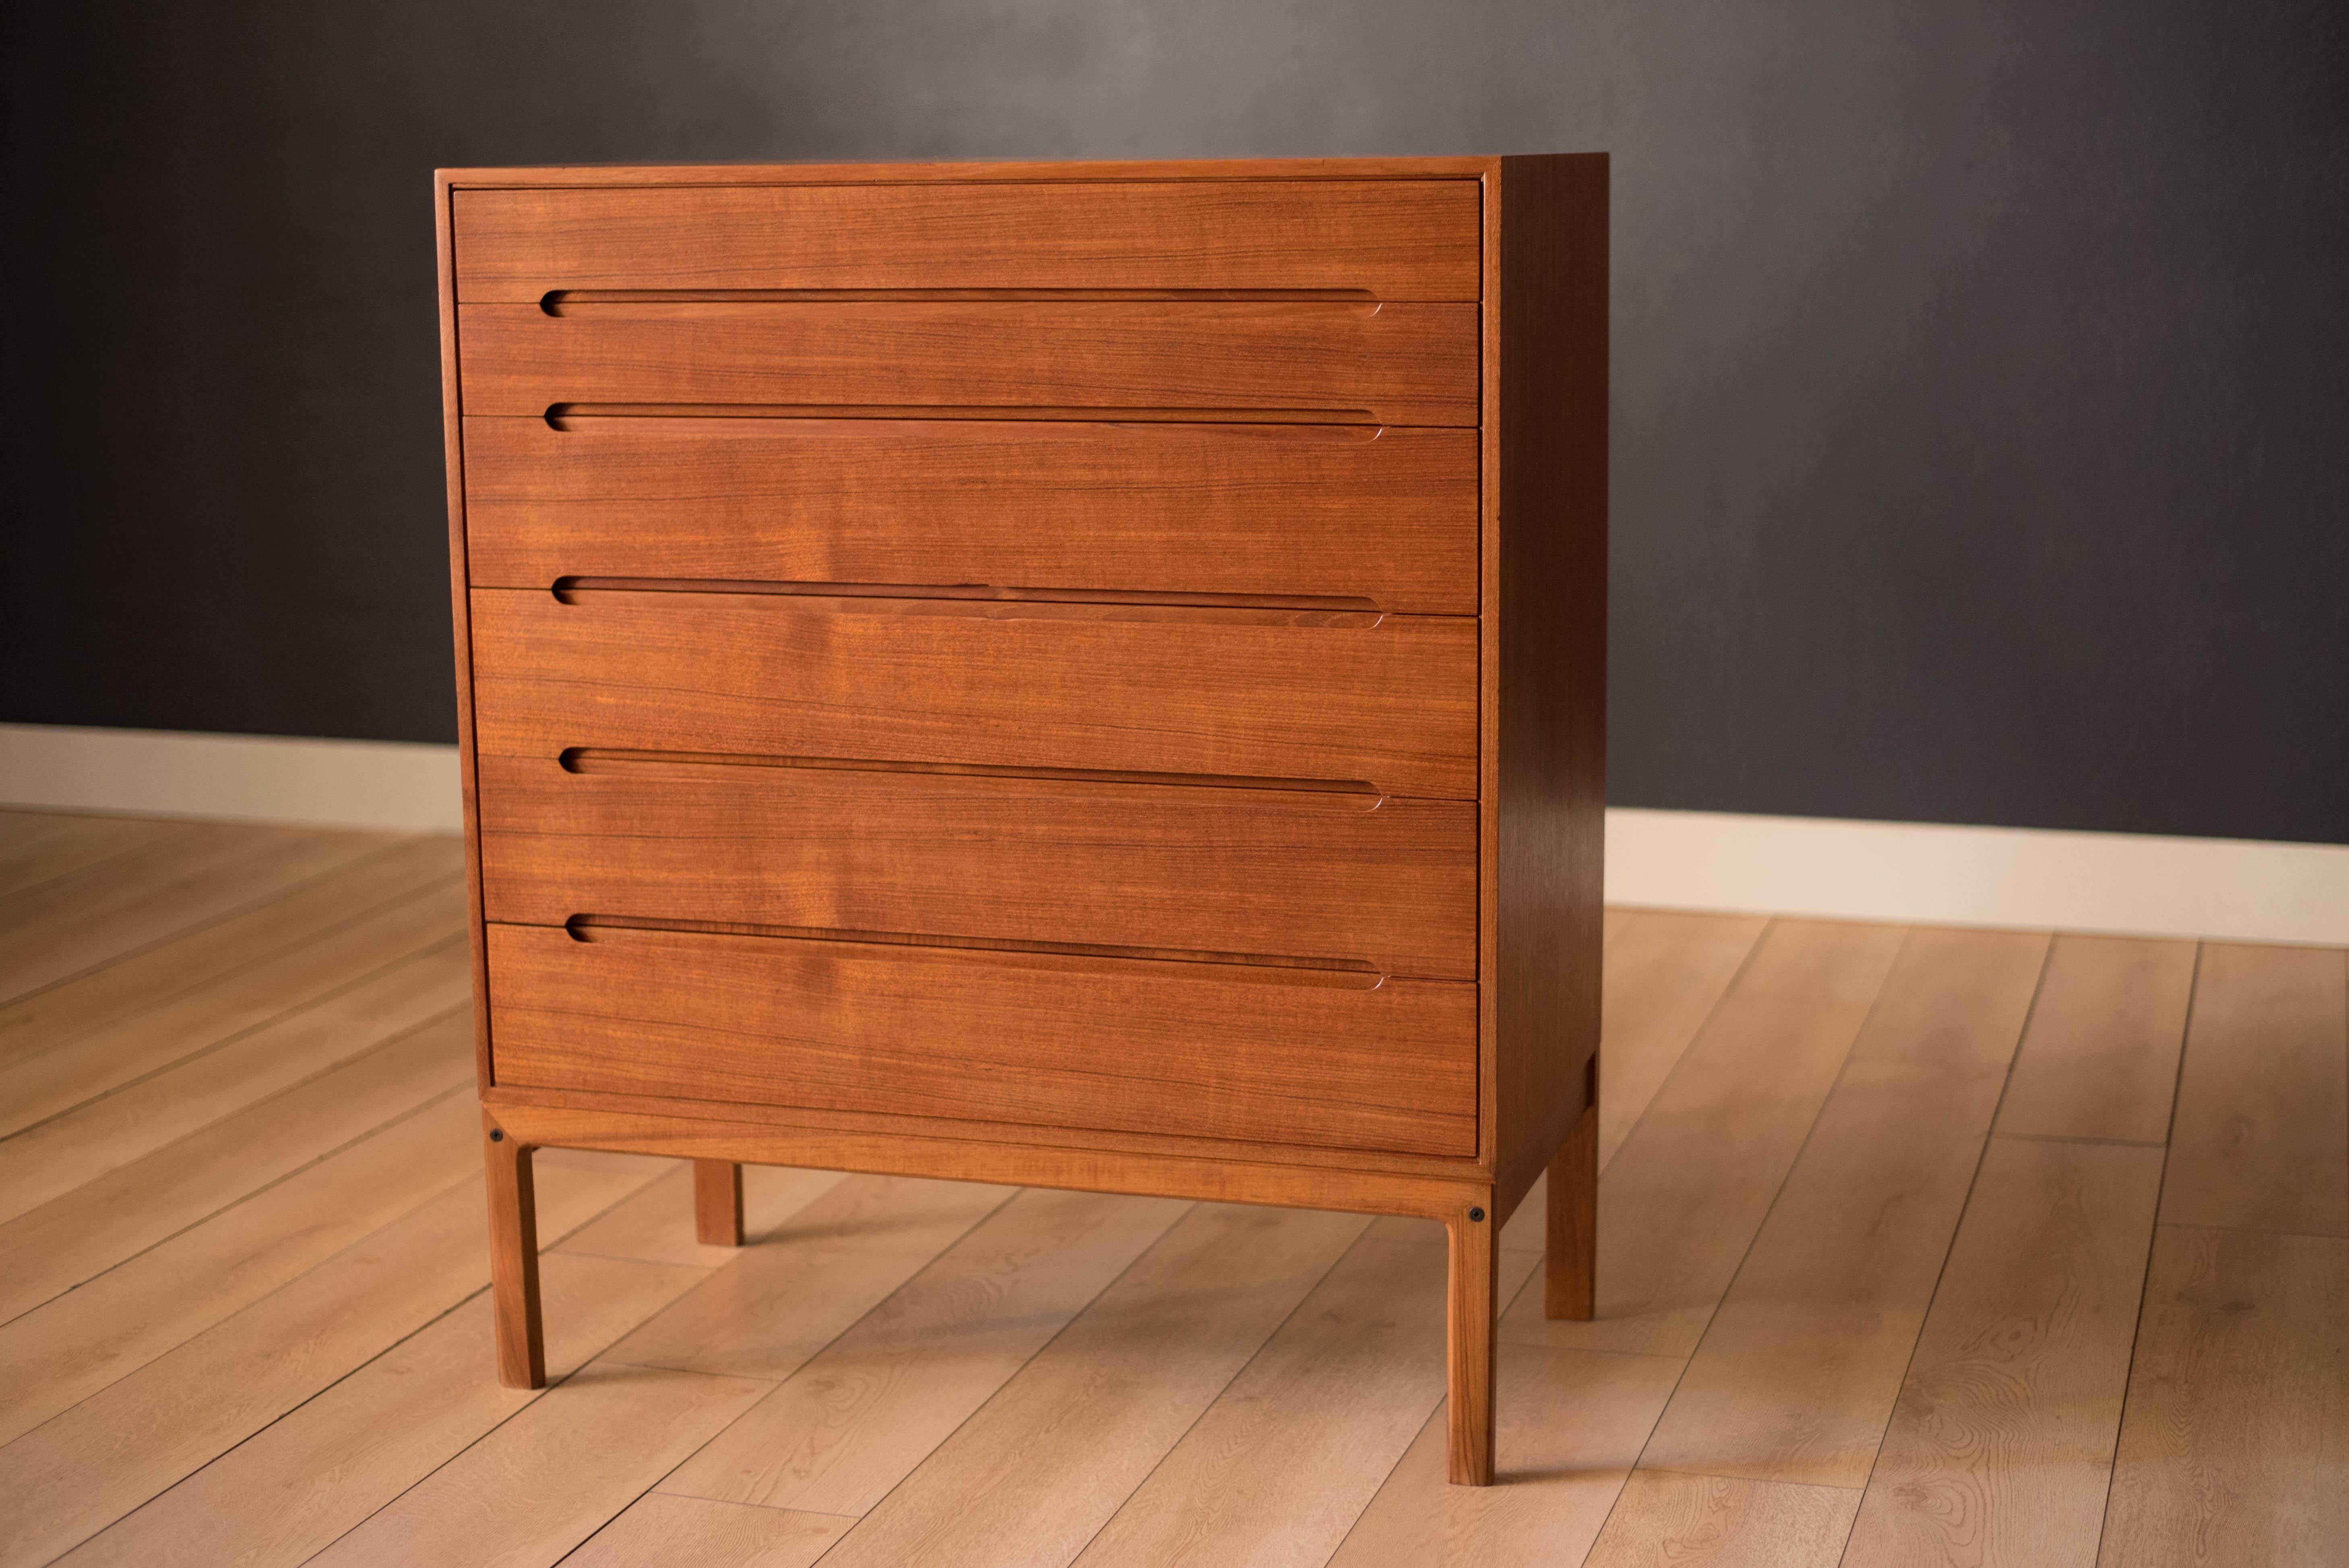 Mid-Century Modern highboy dresser chest in teak designed by Arne Wahl Iversen for Vinde Møbelfabrik. This piece offers plenty of storage including six dovetailed drawers with inset sculpted handles. All interior drawers are lined in